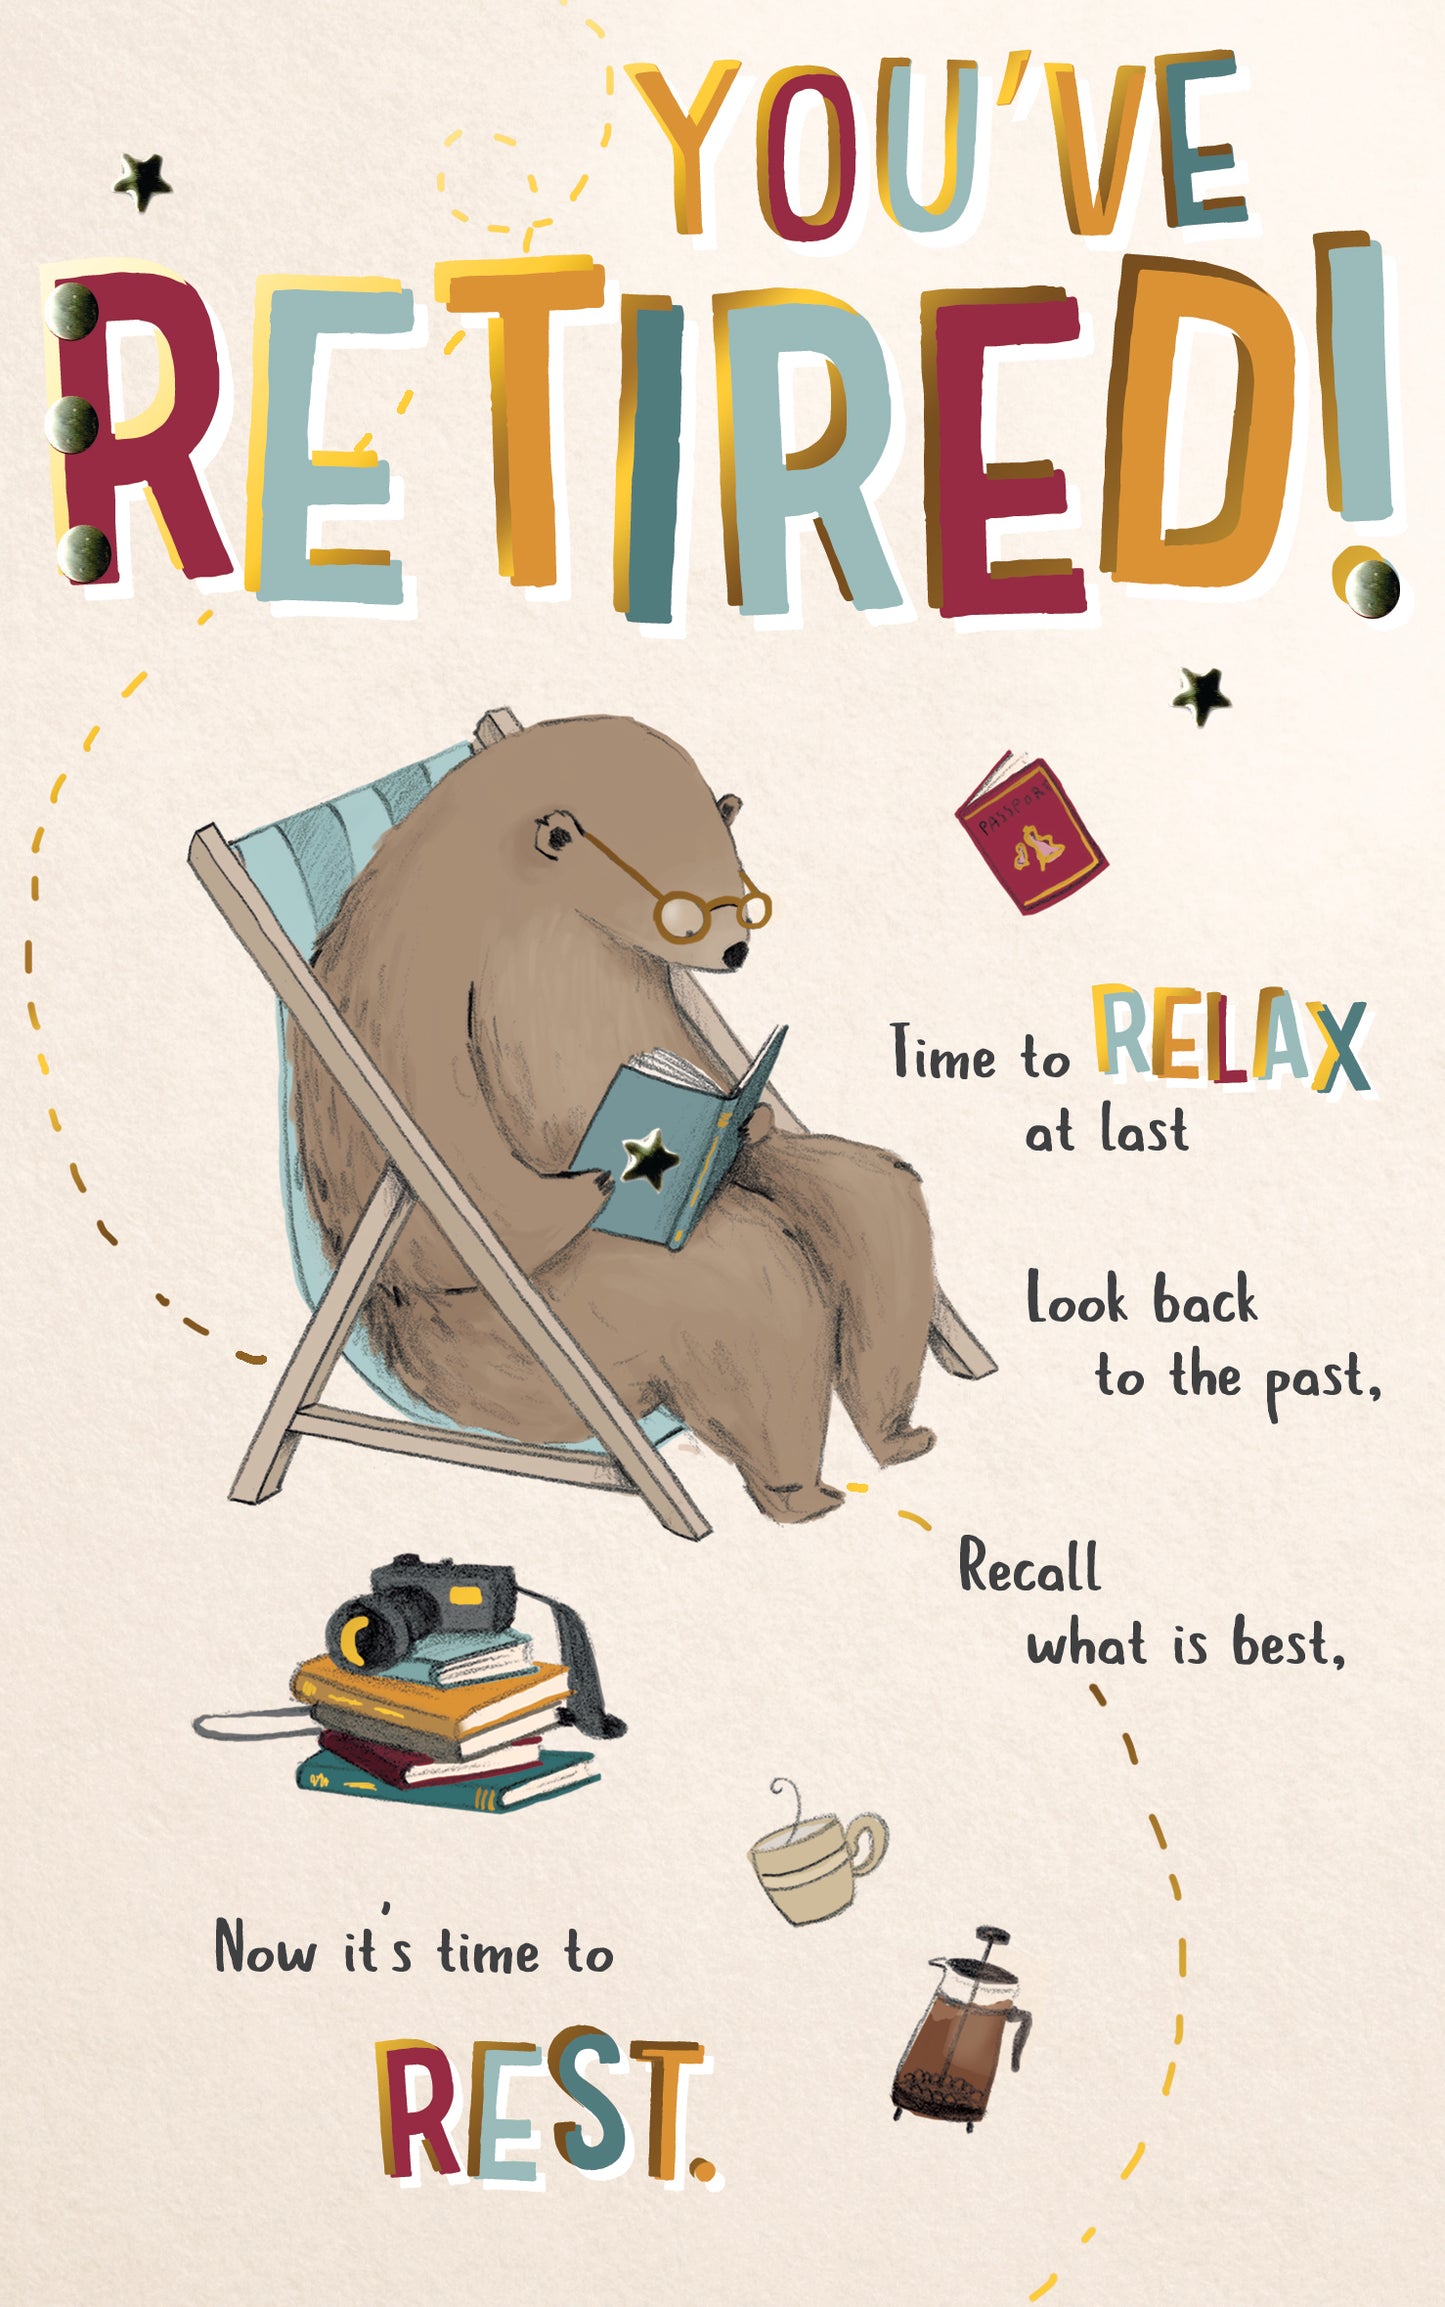 You've Retired! Relax Embellished Retirement Greeting Card